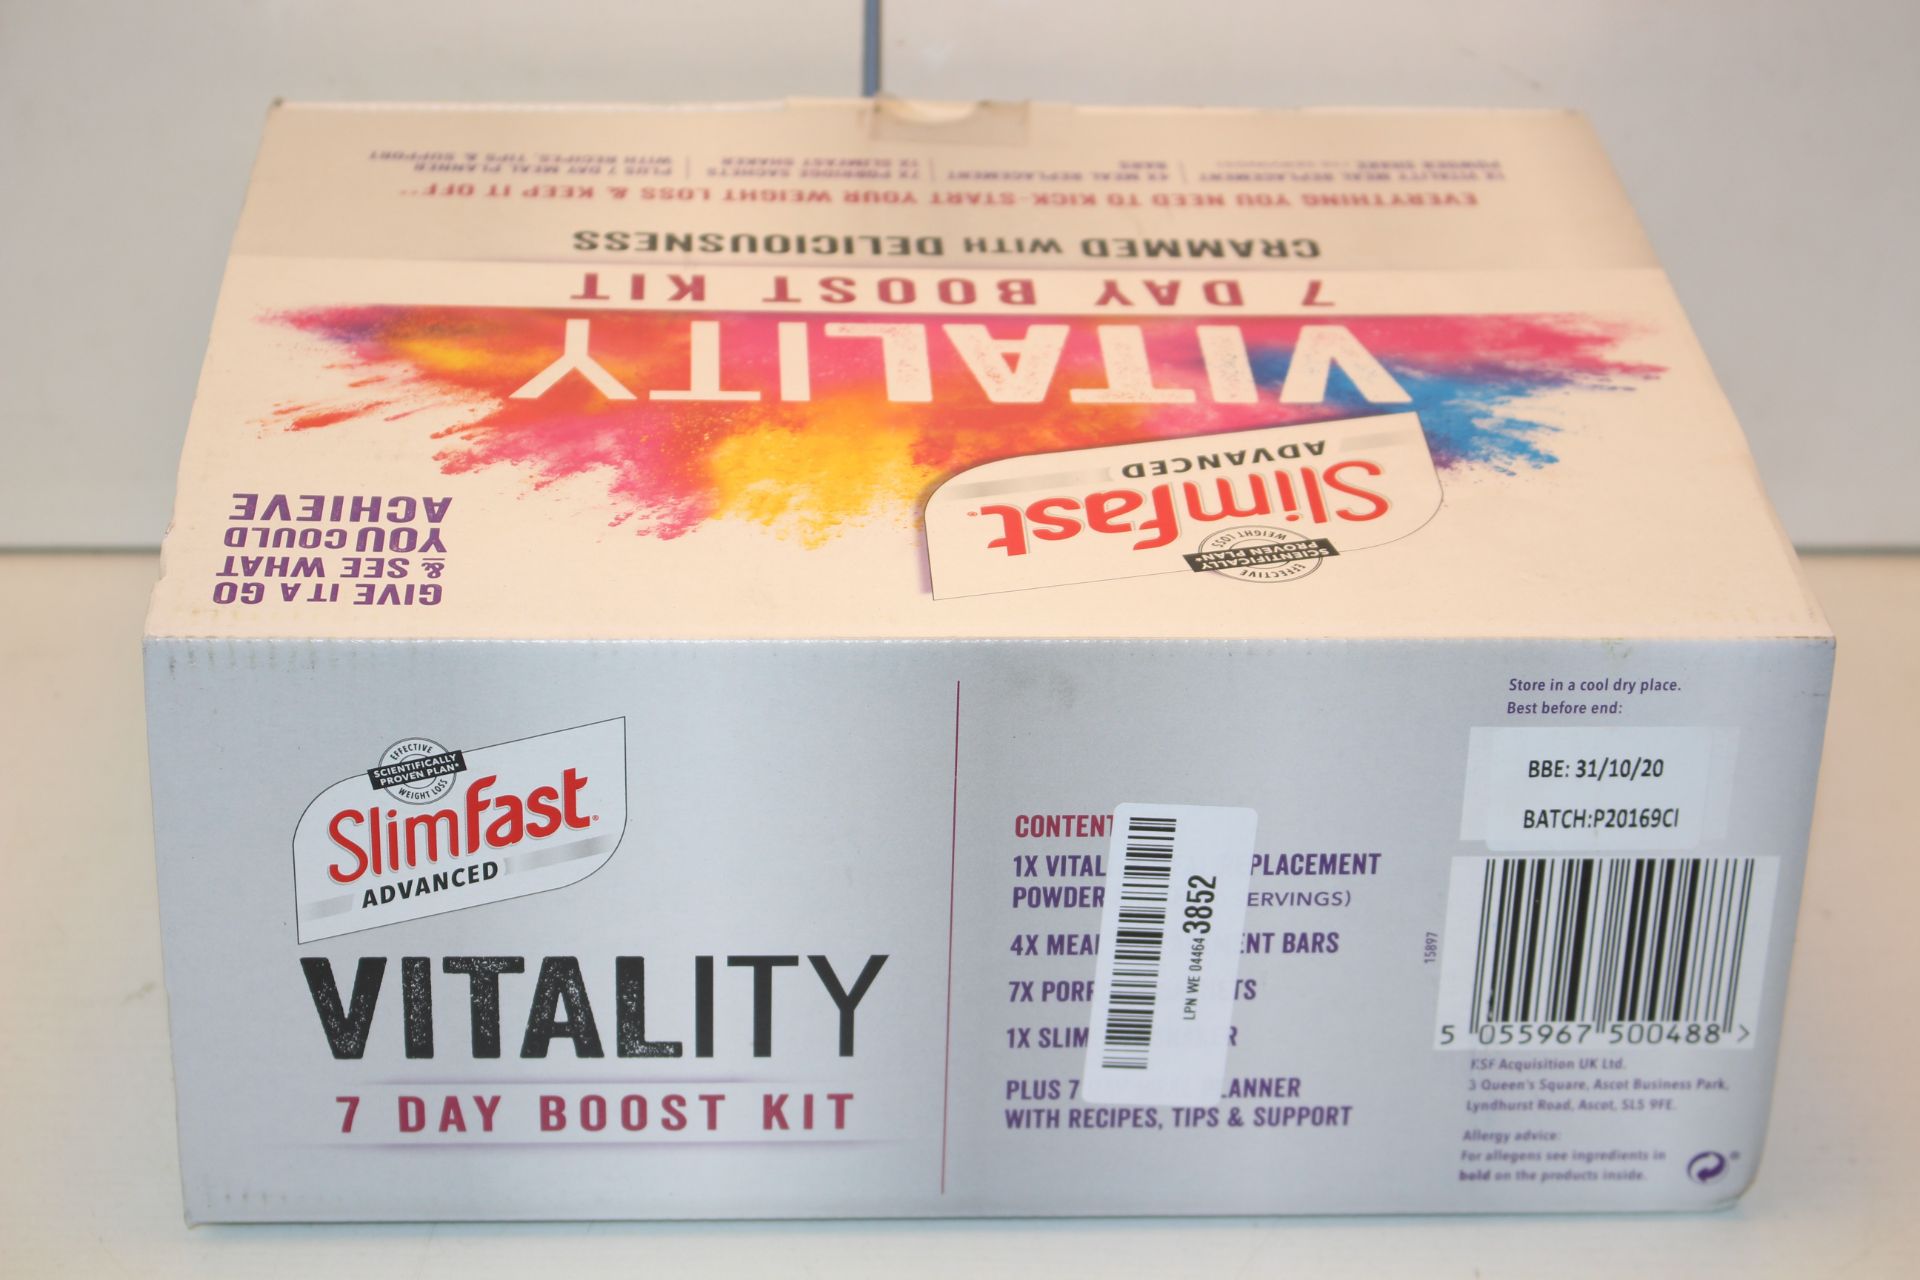 5X BOXED SLIMFAST ADVANCED VITALITY 7 DAY BOOST KITS COMBINED RRP £150.00Condition ReportAppraisal